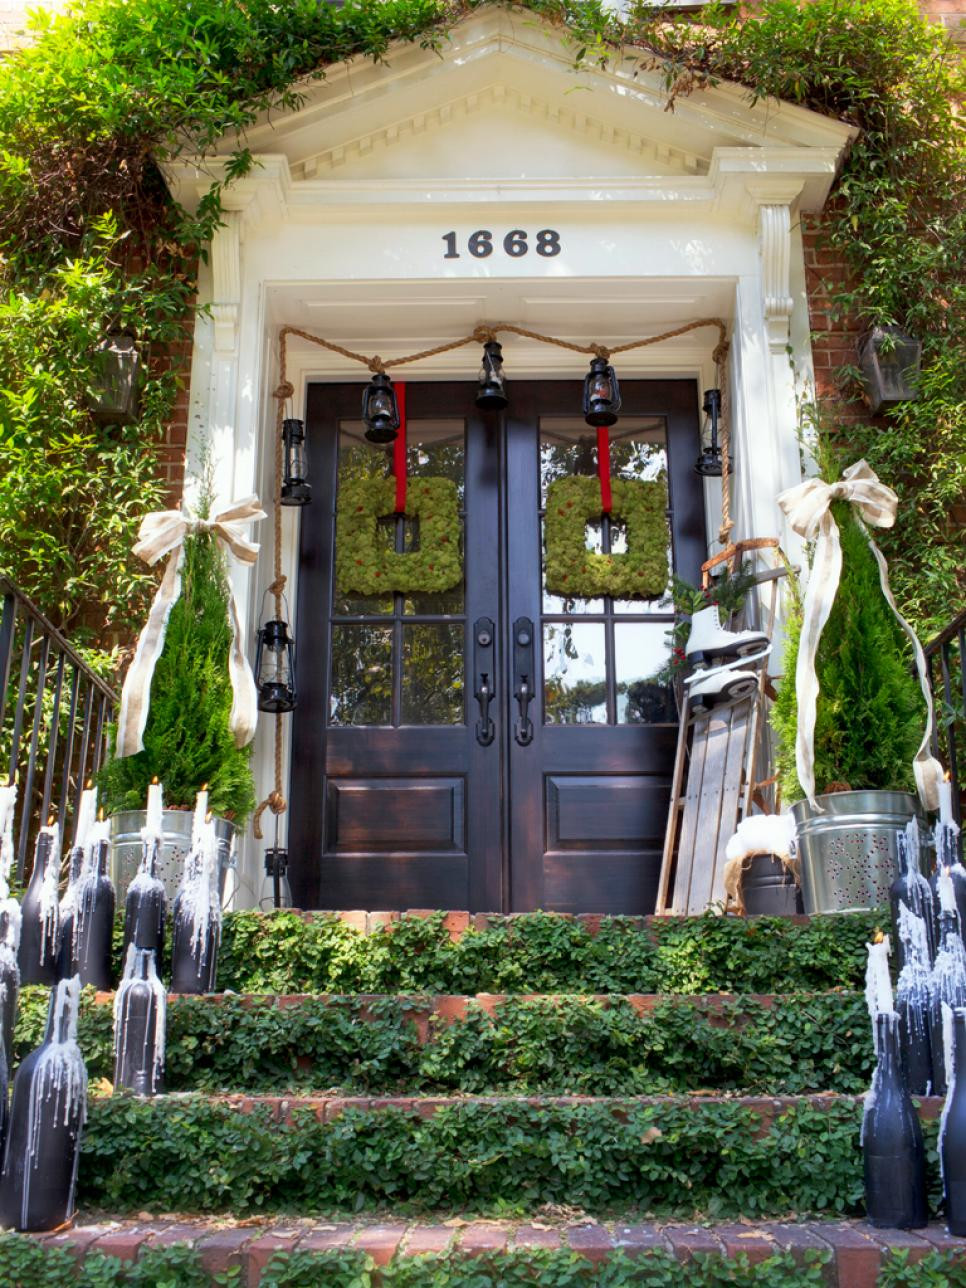 Outdoor Christmas Decorating Ideas
 Christmas Decorating Ideas For Porch Festival Around the